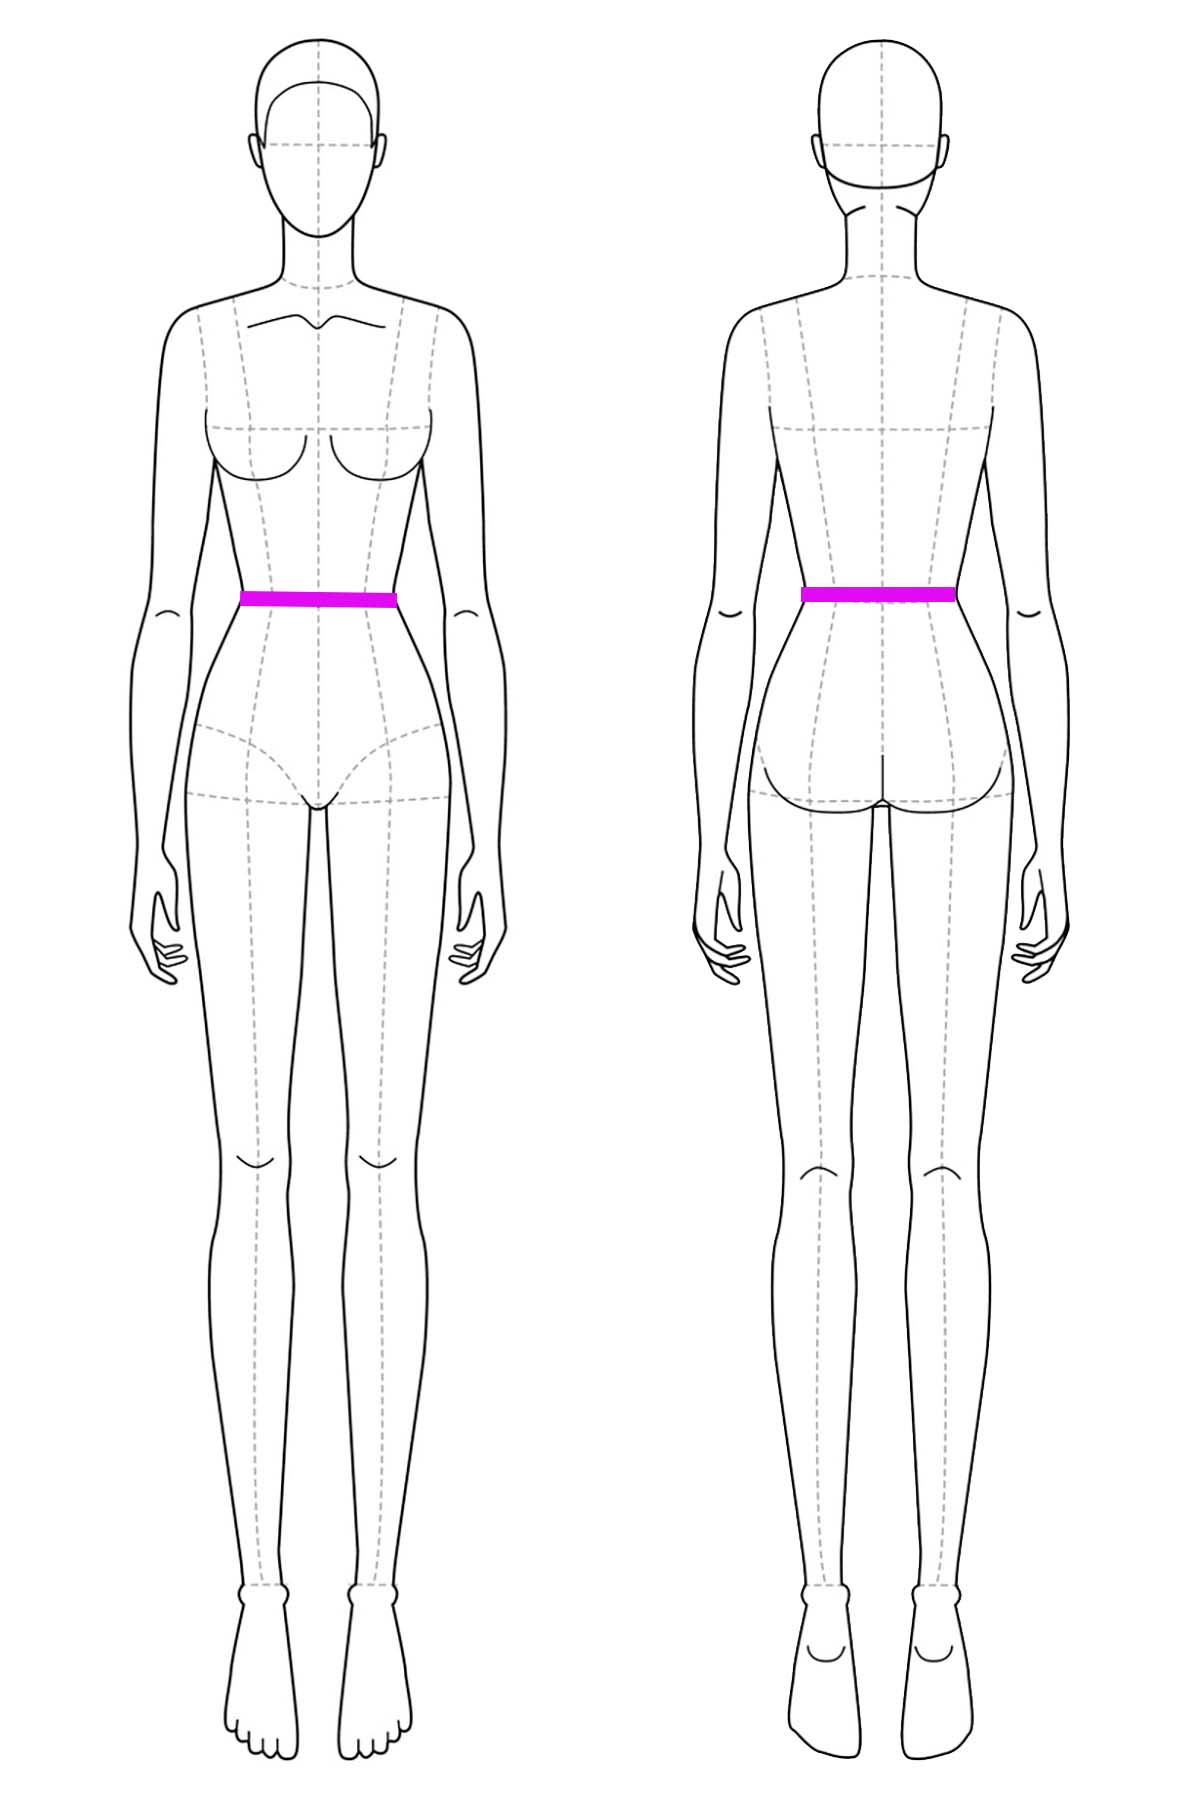 A set of line drawings of a female body, front and back views. Bright pink lines are drawn across it to indicate waistline placement.